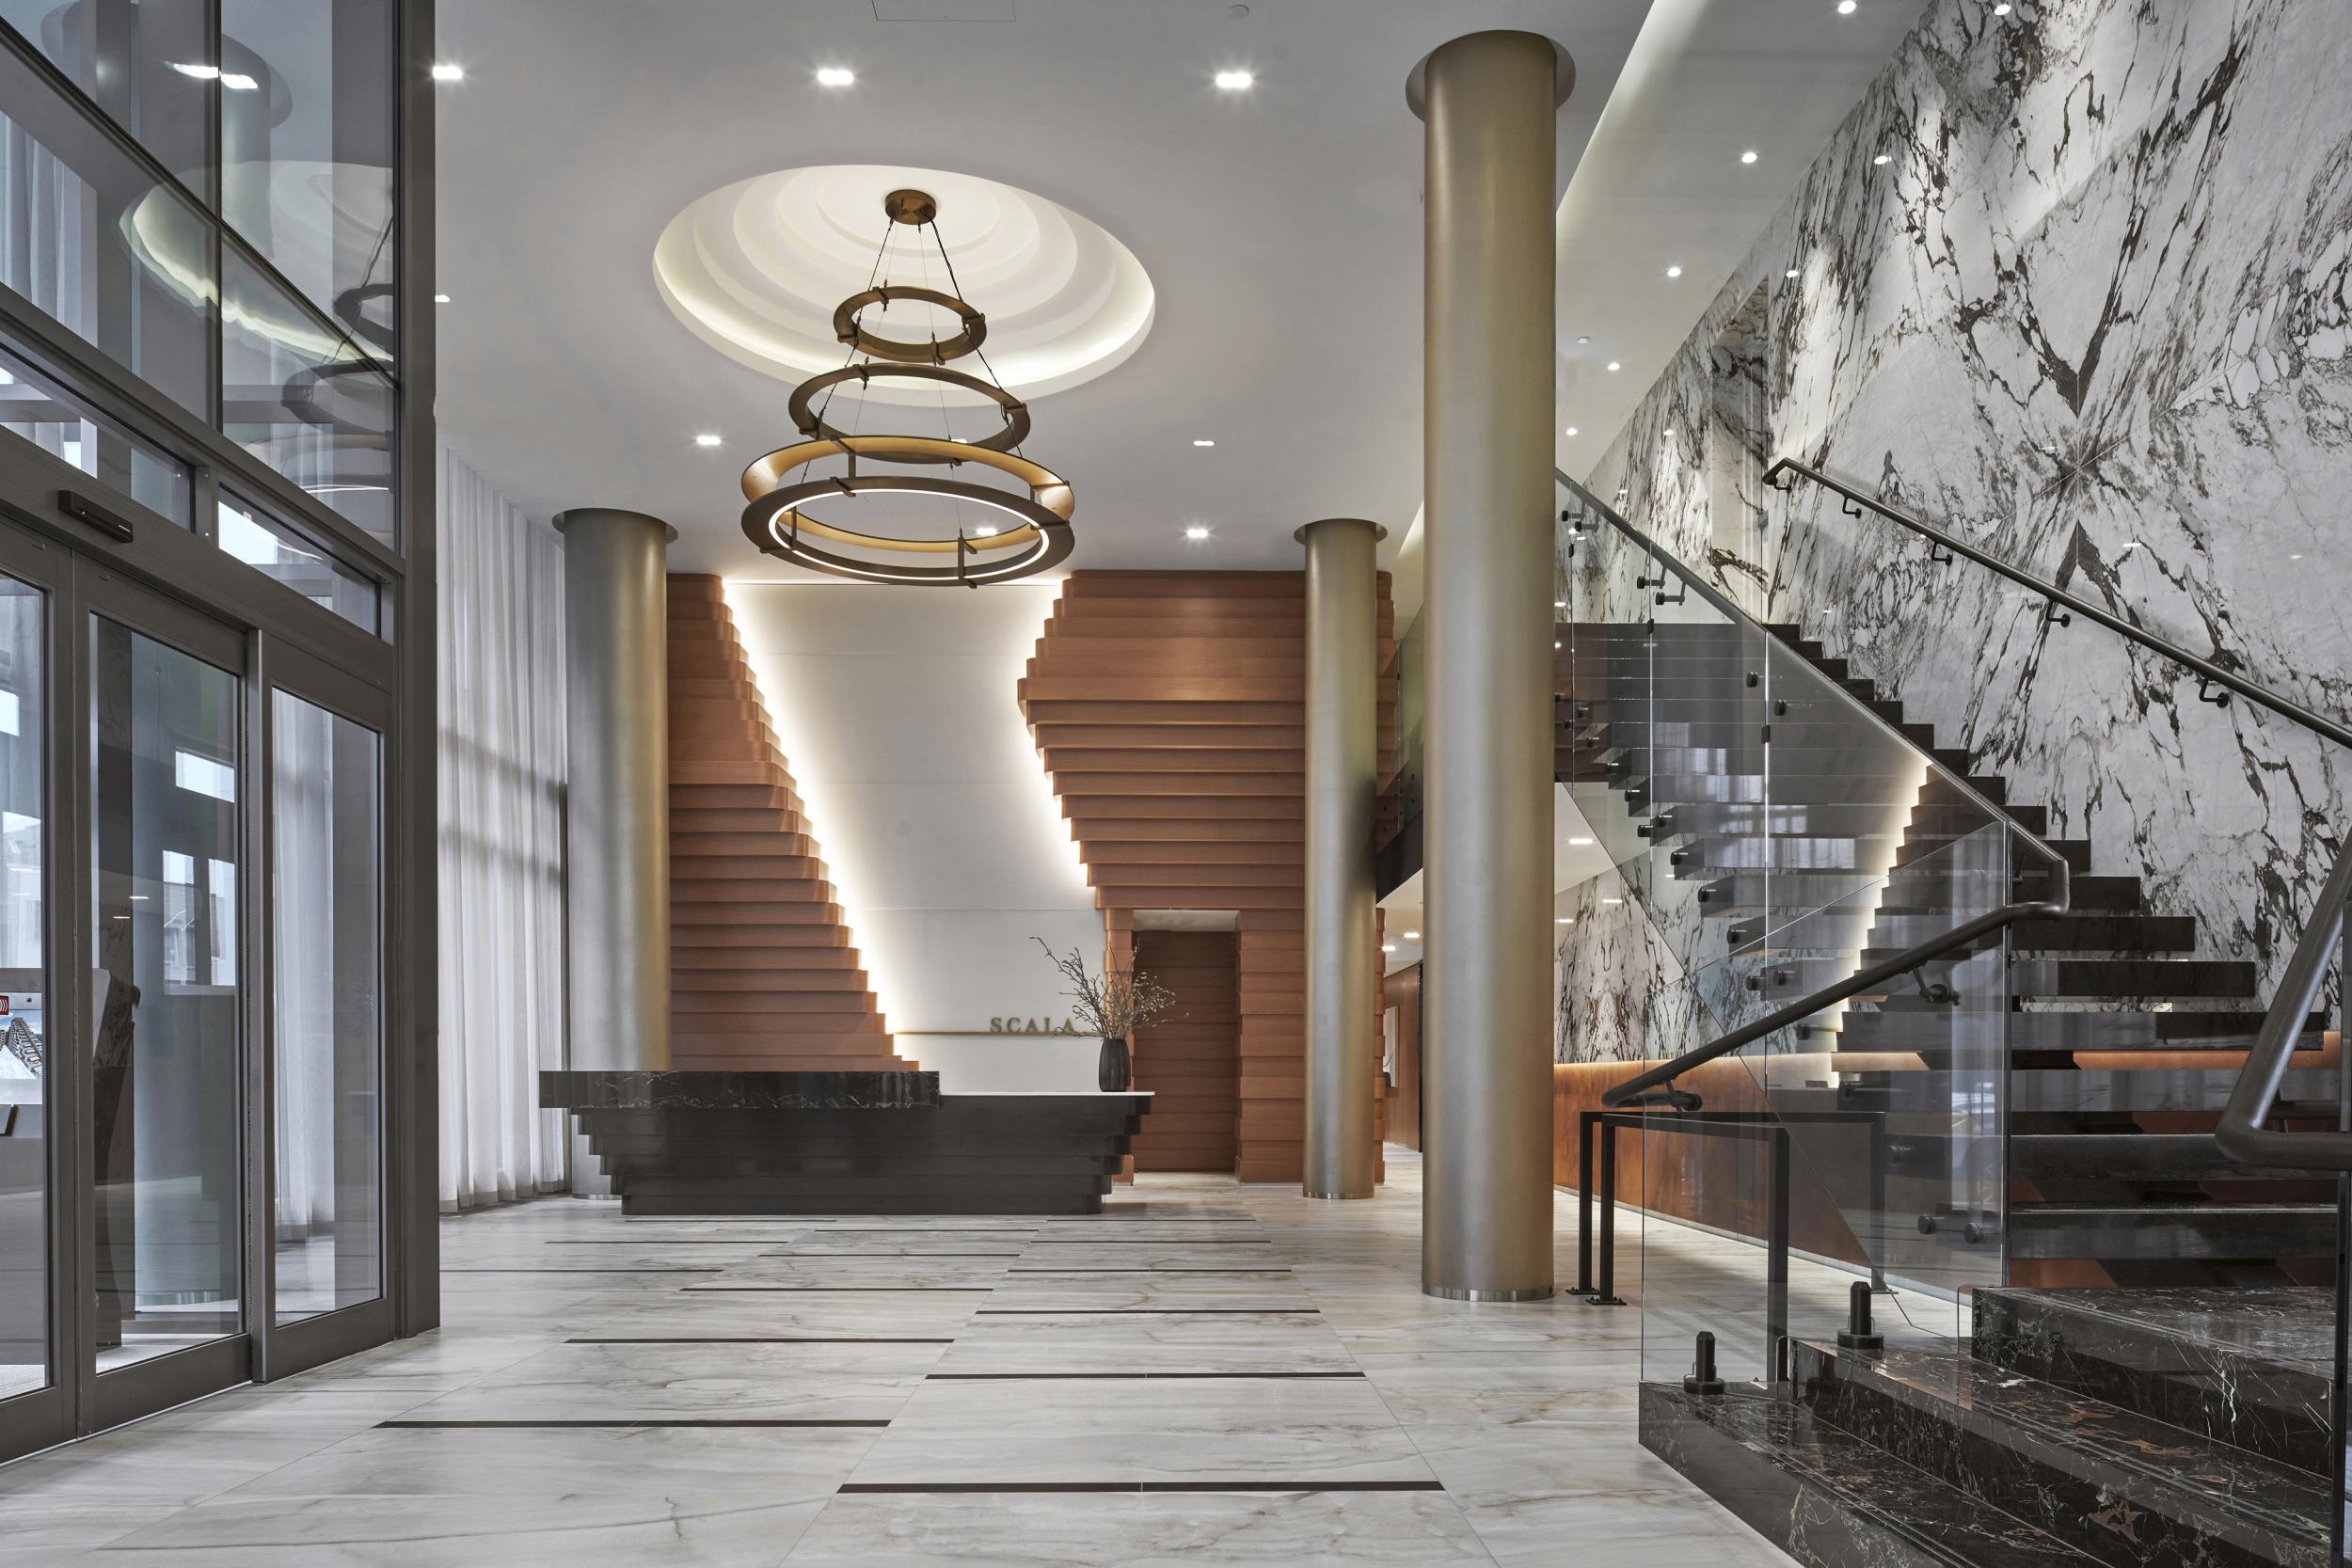 Scala Lobby with Concierge Desk and Stairs